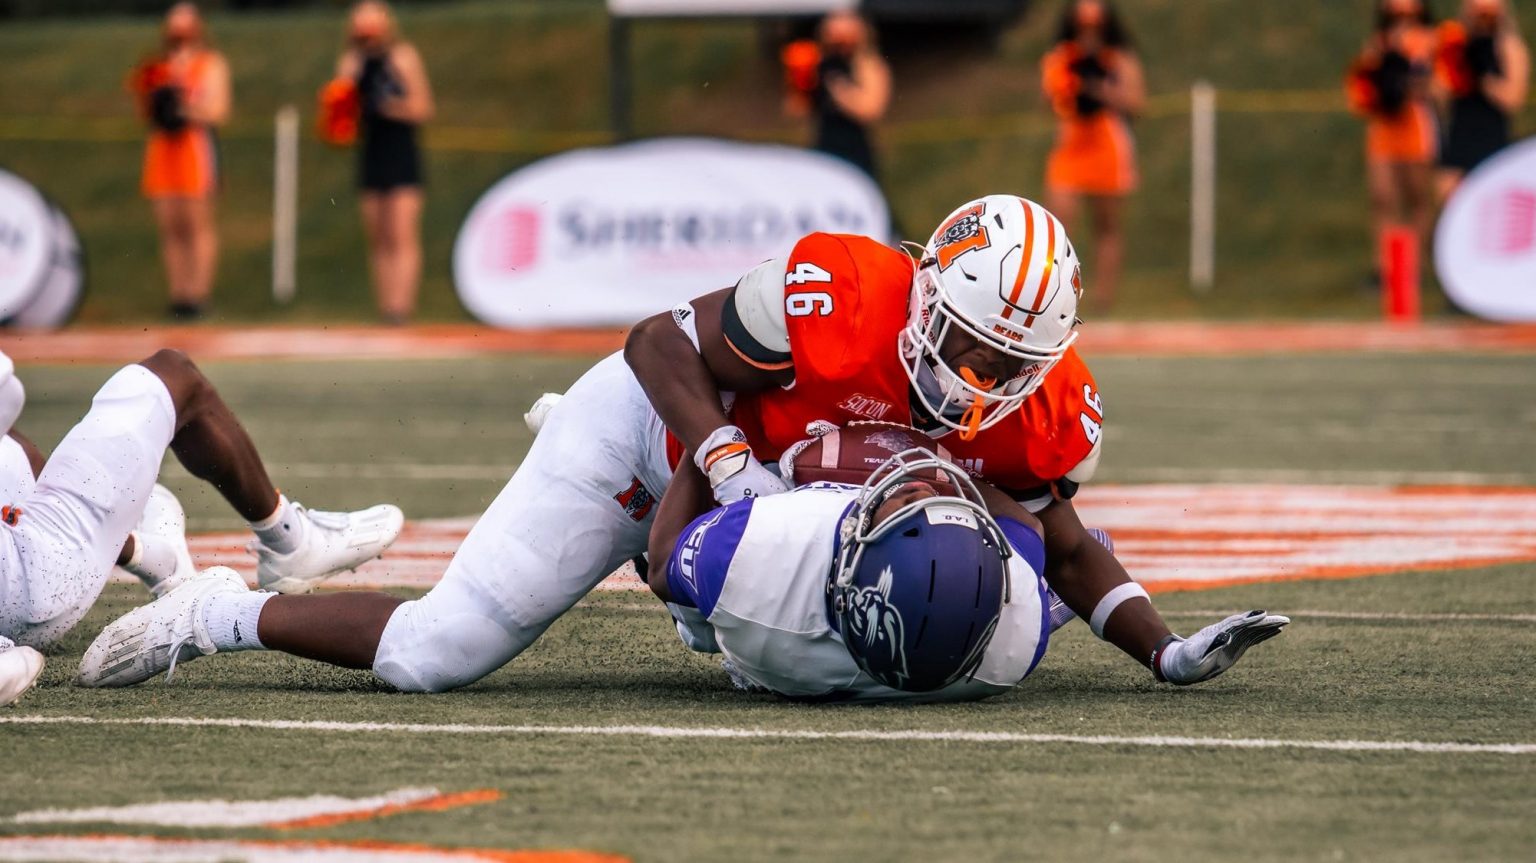 2021 Fcs Season Preview Mercer The College Sports Journal 7701